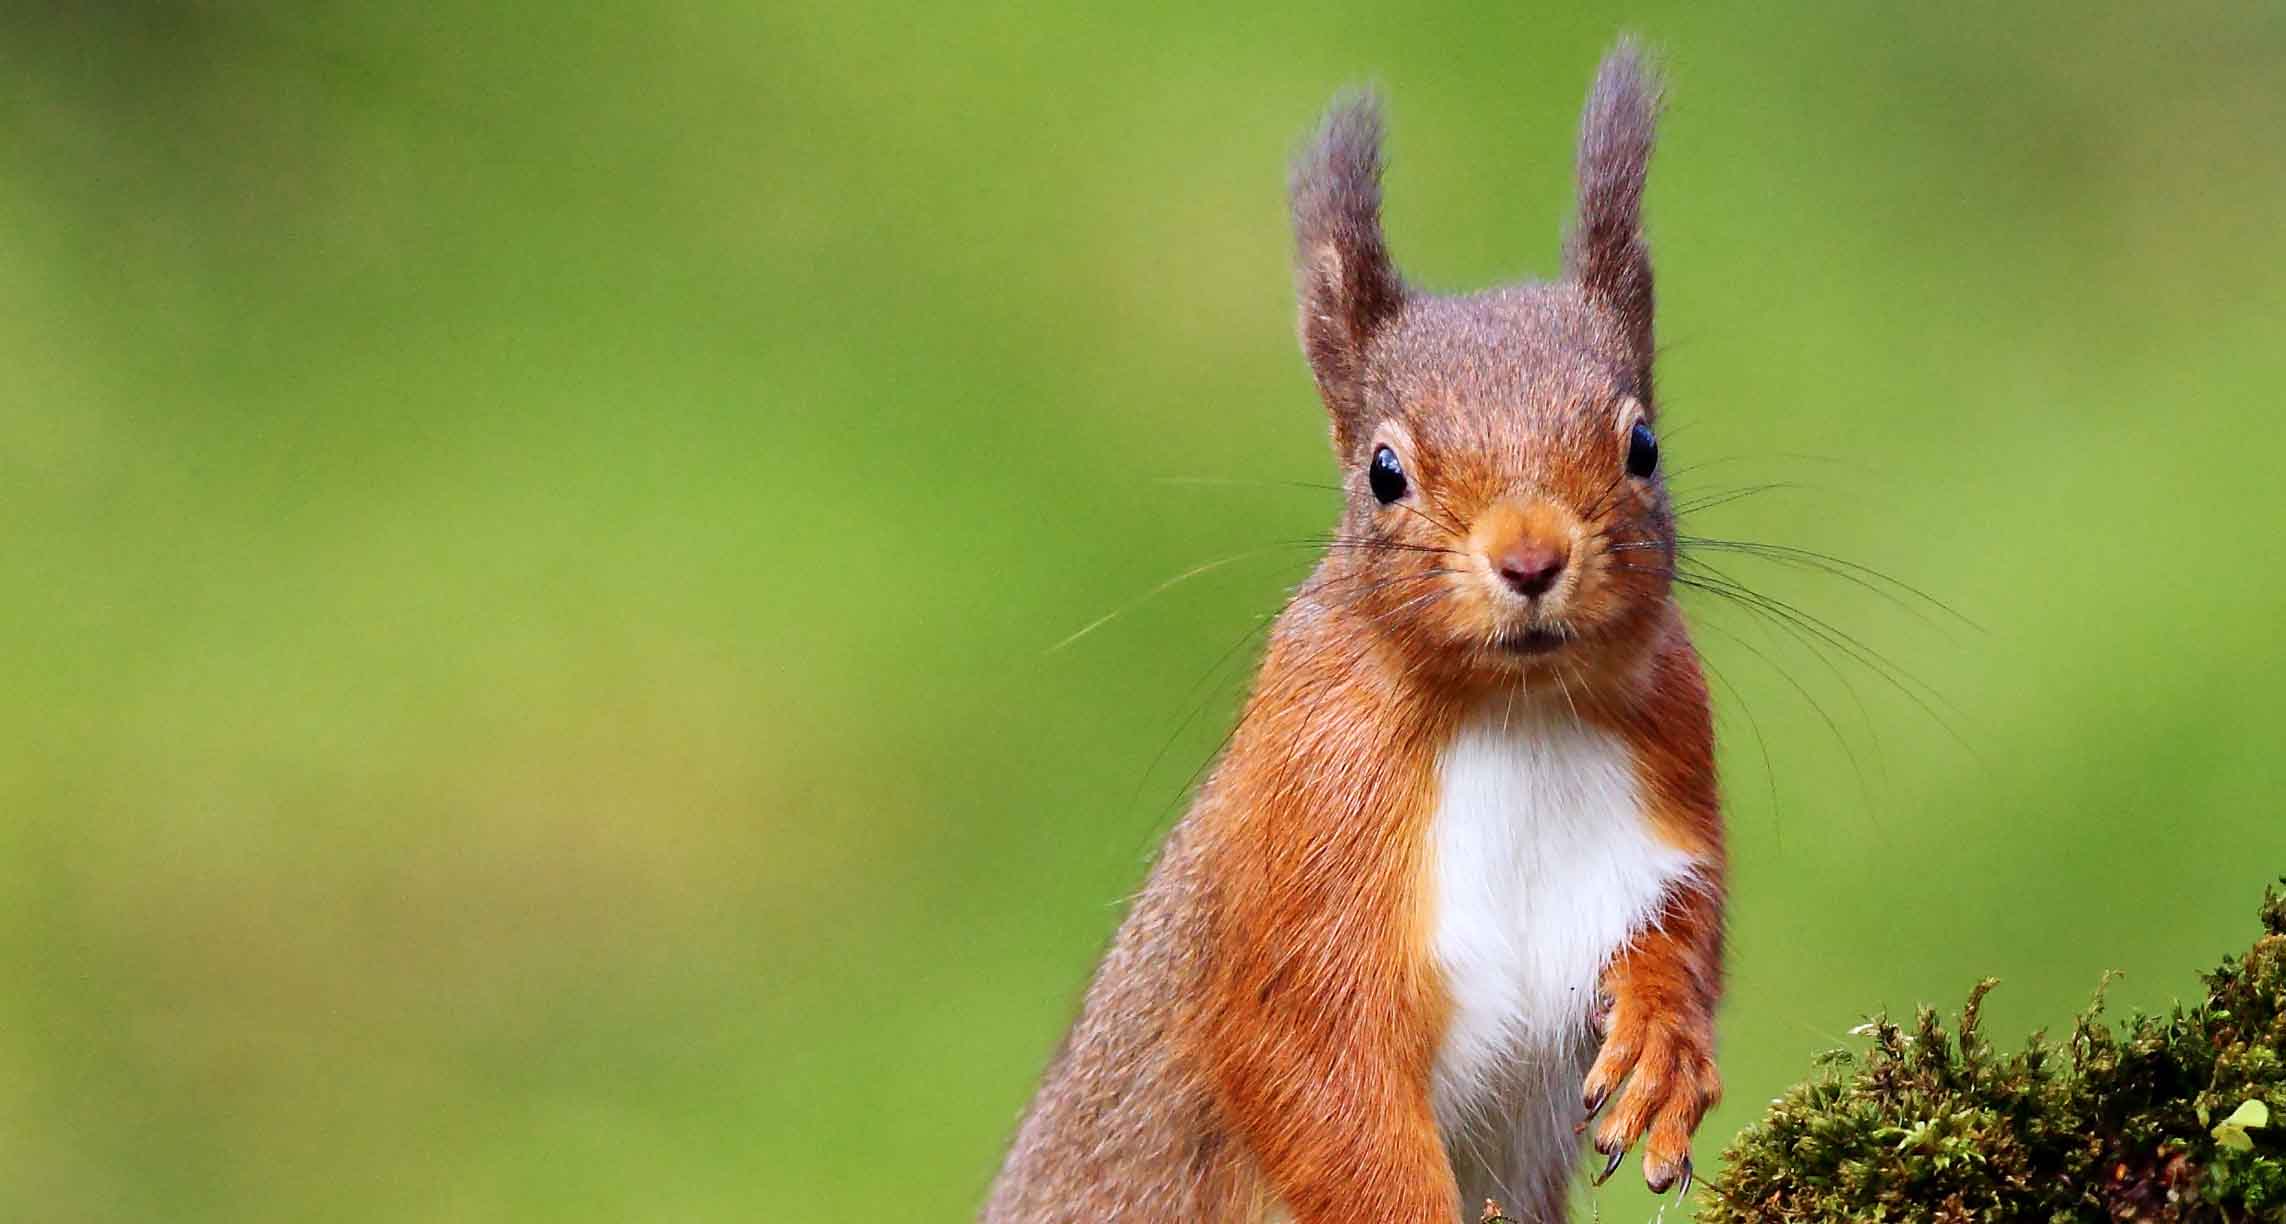 Red squirrel Targn Pleiades Shutterstock Providing reliable evidence for Scottish red squirrel conservation